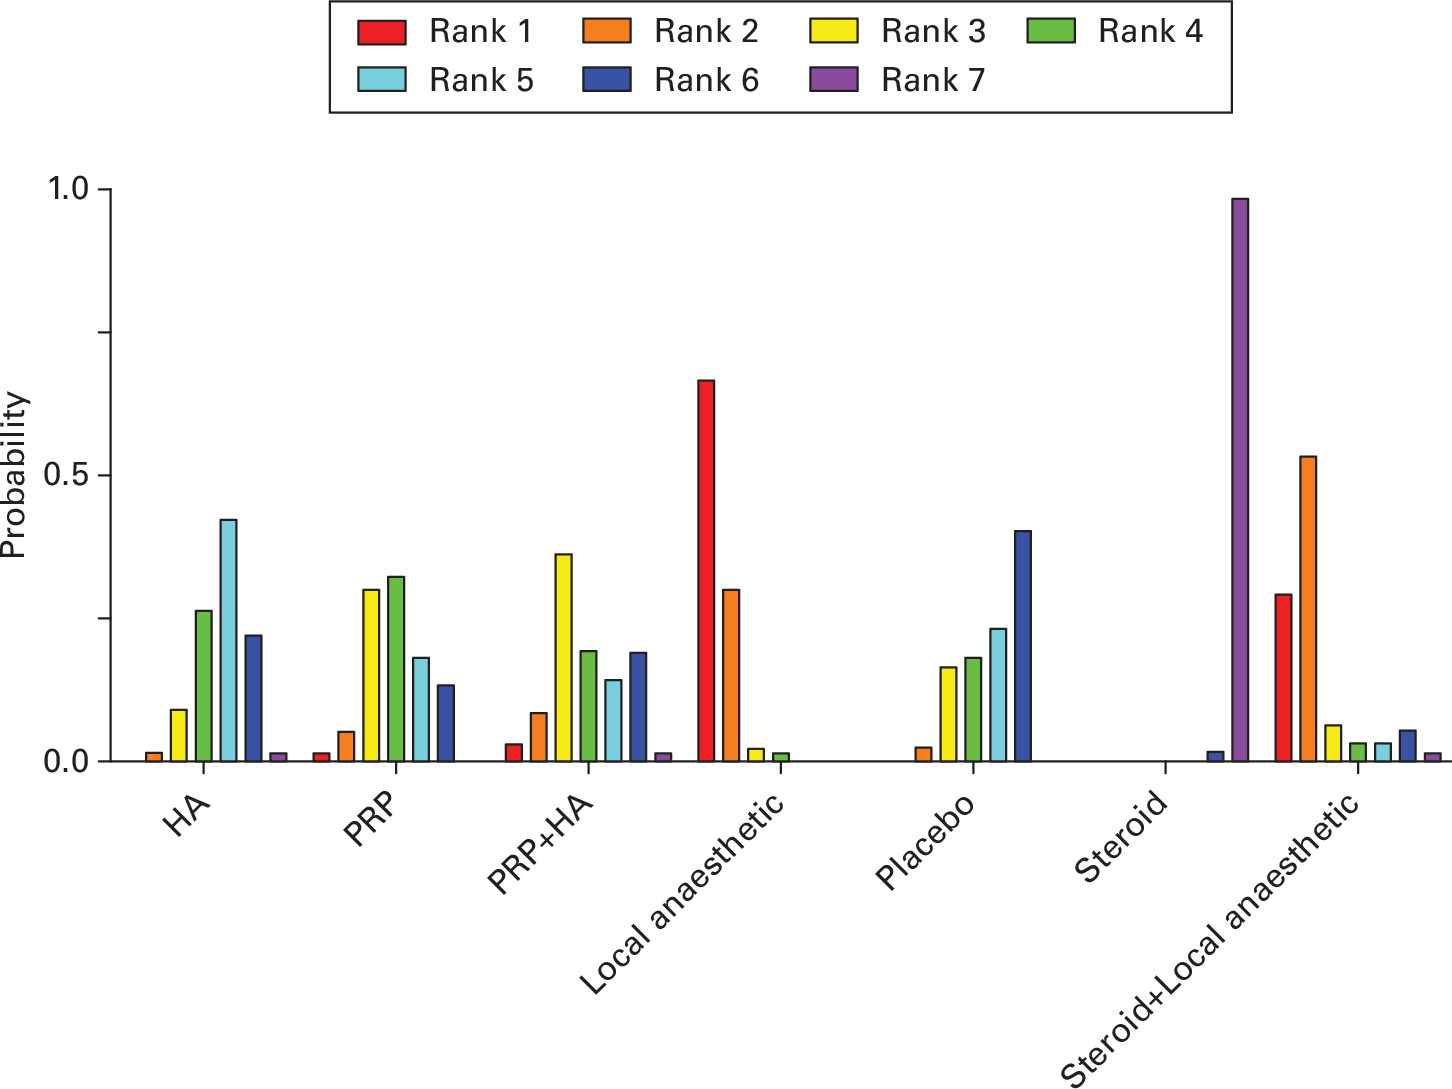 Fig. 3 
            Rank probability of visual analogue scale score at three months, with Rank 1 as the worst. HA, hyaluronic acid; PRP, platelet-rich plasma.
          